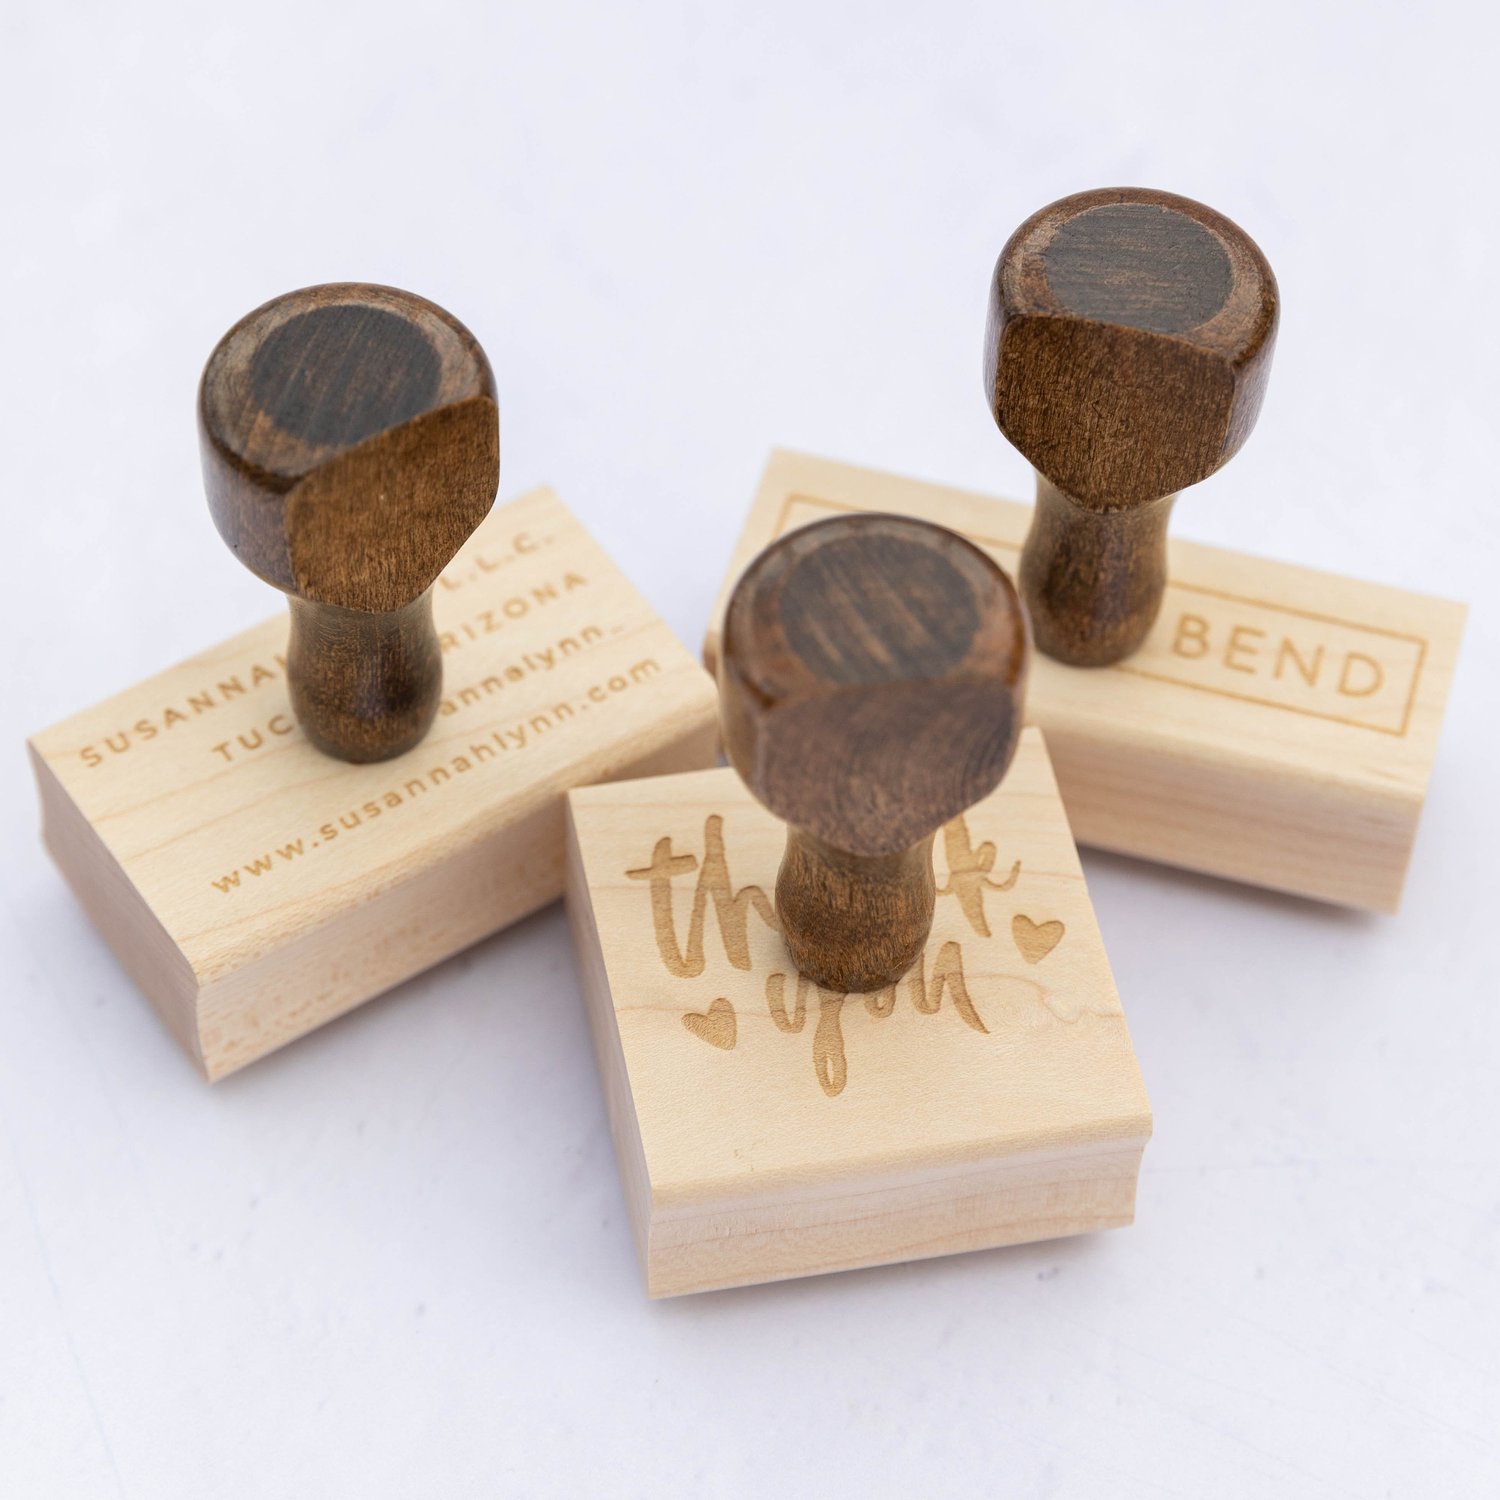 Egg Date Stamp Kit Wooden Date Stamp Diy Wooden Handle Date